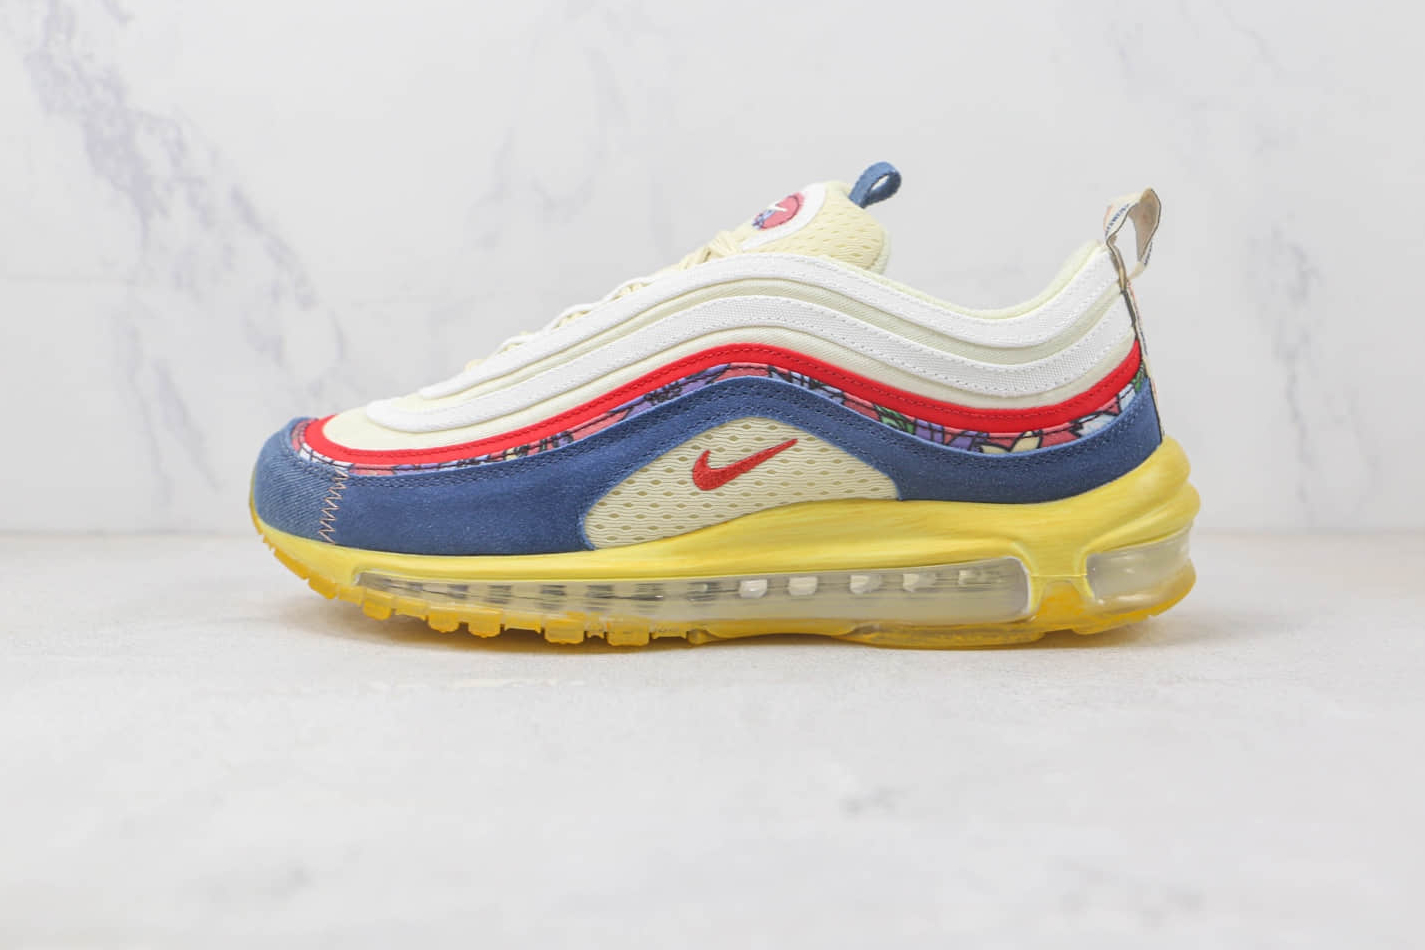 Nike Air Max 97 'Coconut Milk Fossil' DV1486-162 - Premium Sneakers for Sale Today